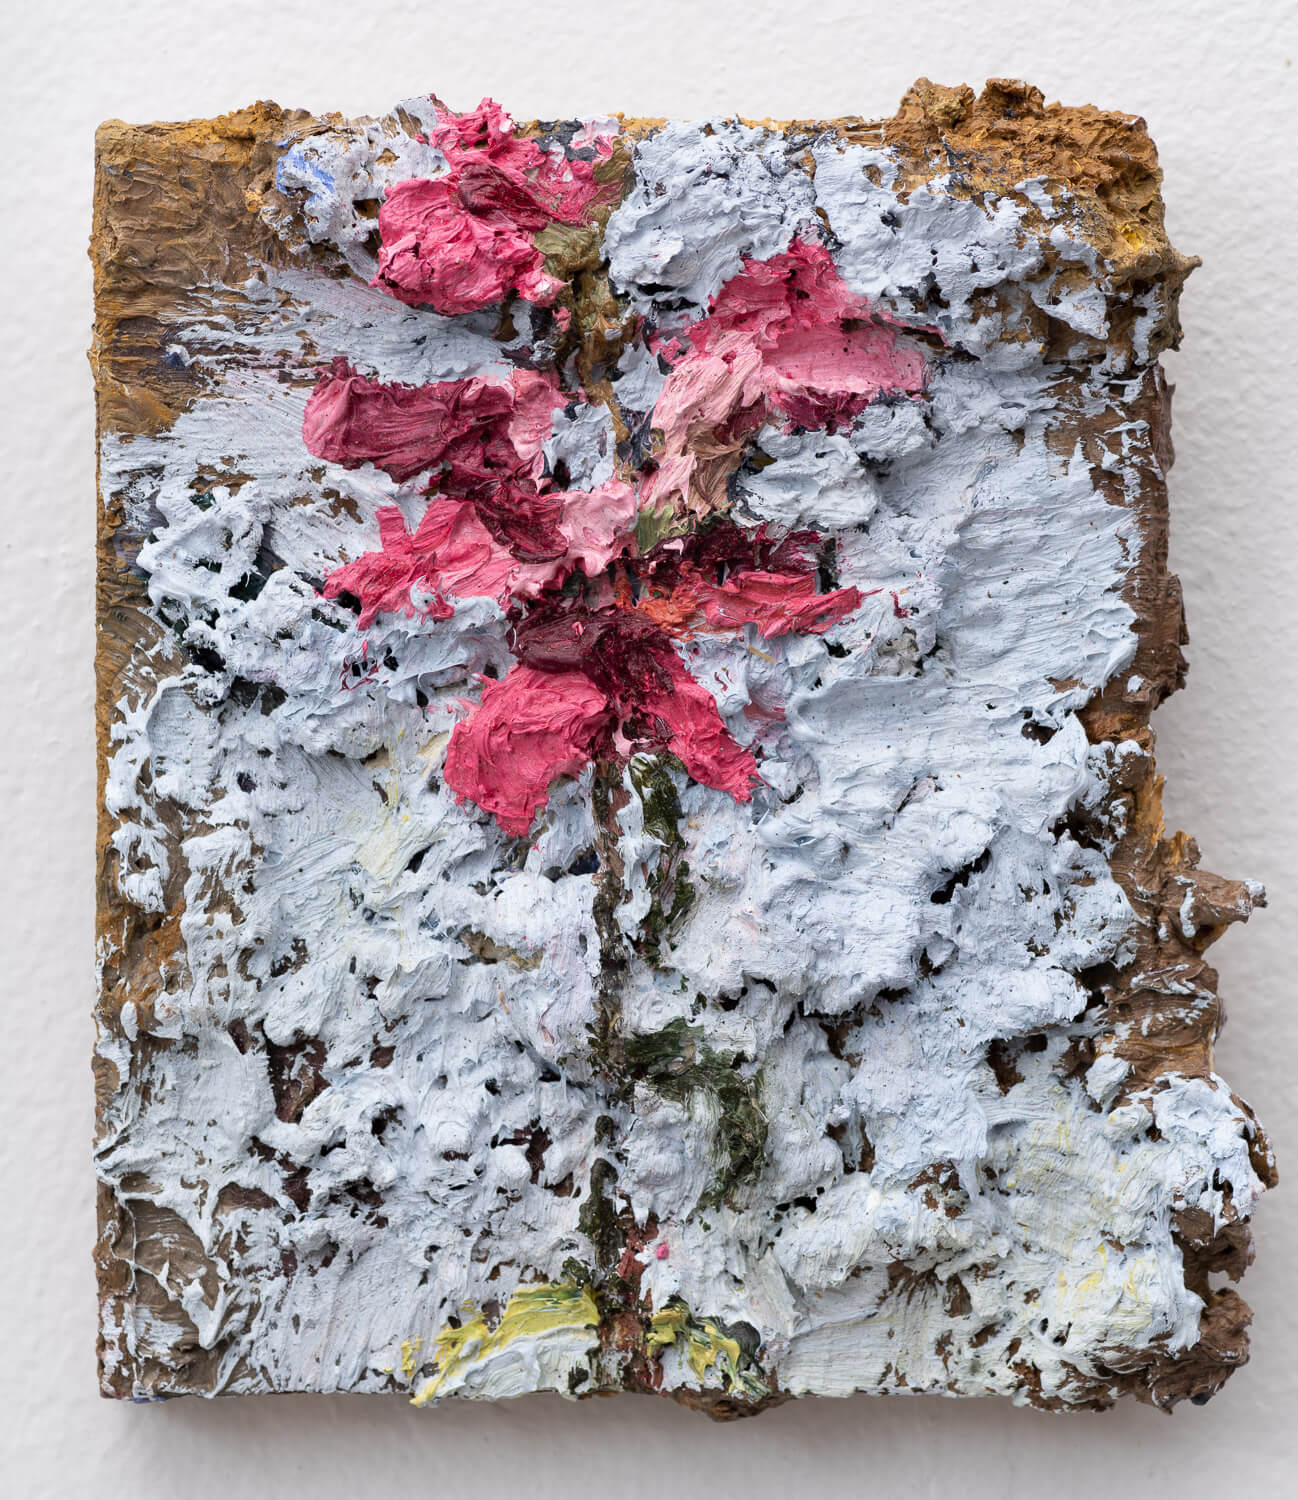 Avital Burg, Backyard snapdragons, 2020, oil on wood, 5 25 x 4 25 inches (courtesy of the artist)